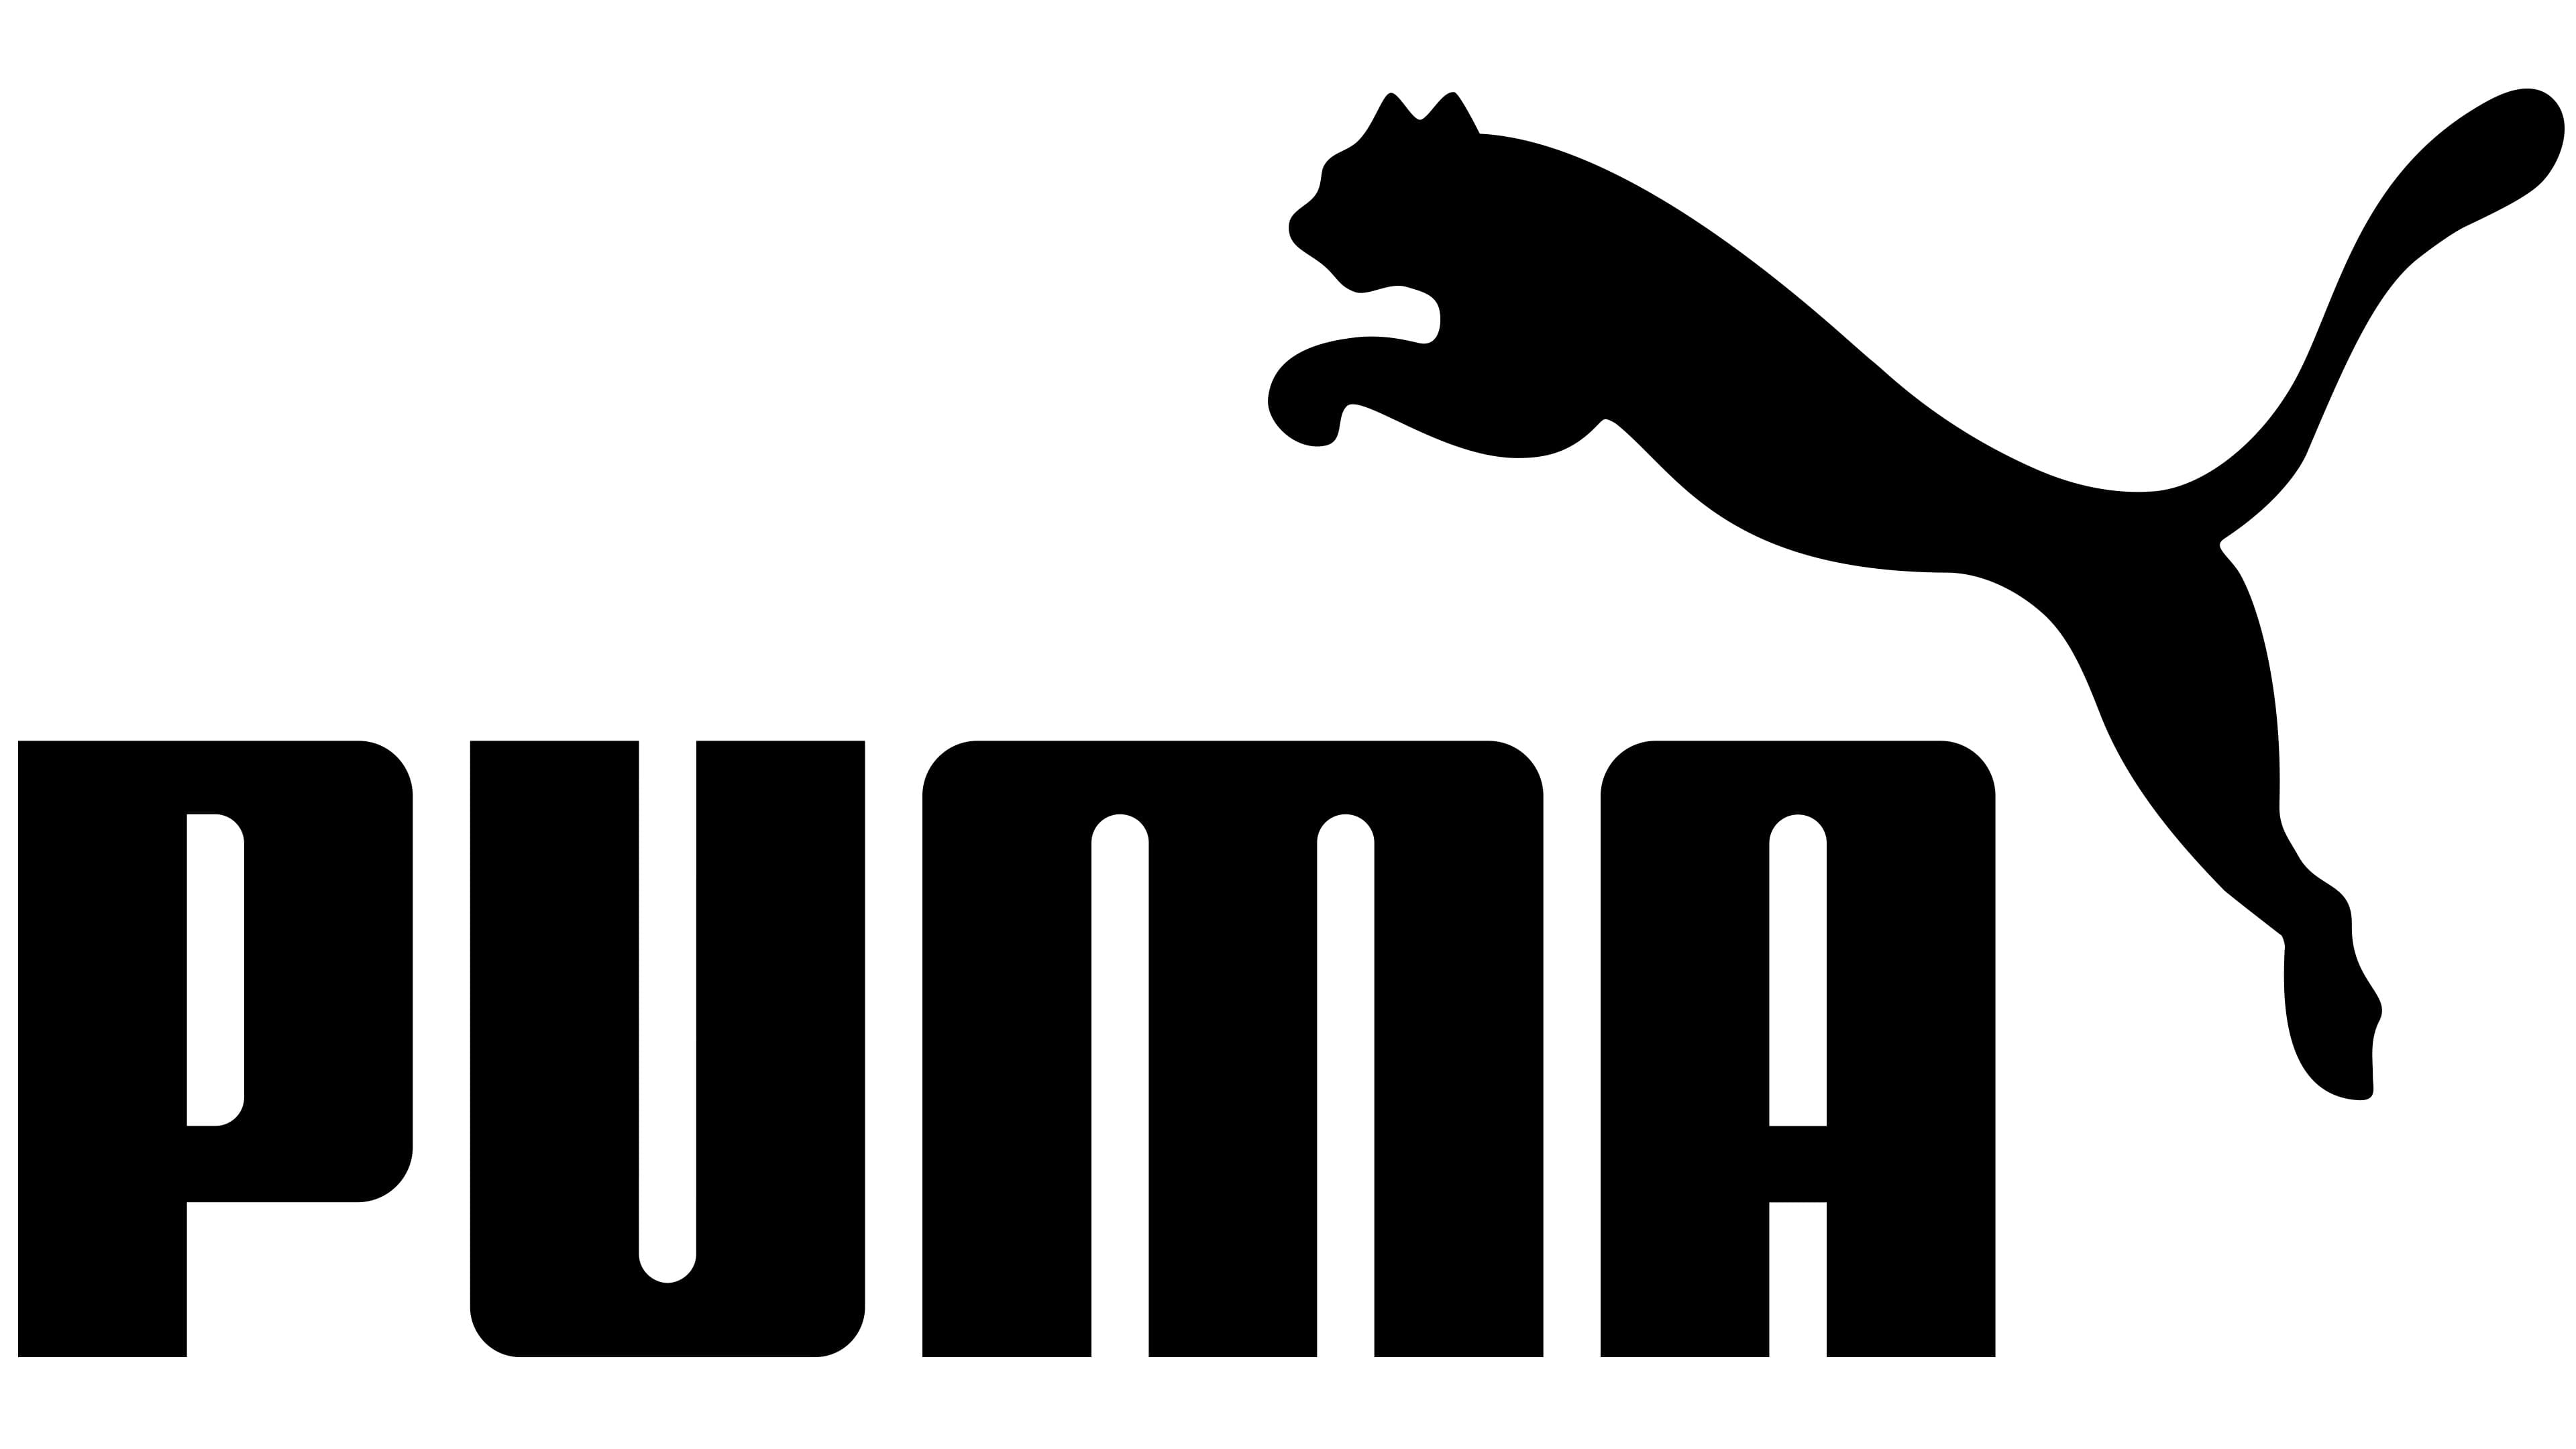 starved dance widow Puma Logo History And Meaning: Celebrating The Puma Symbol